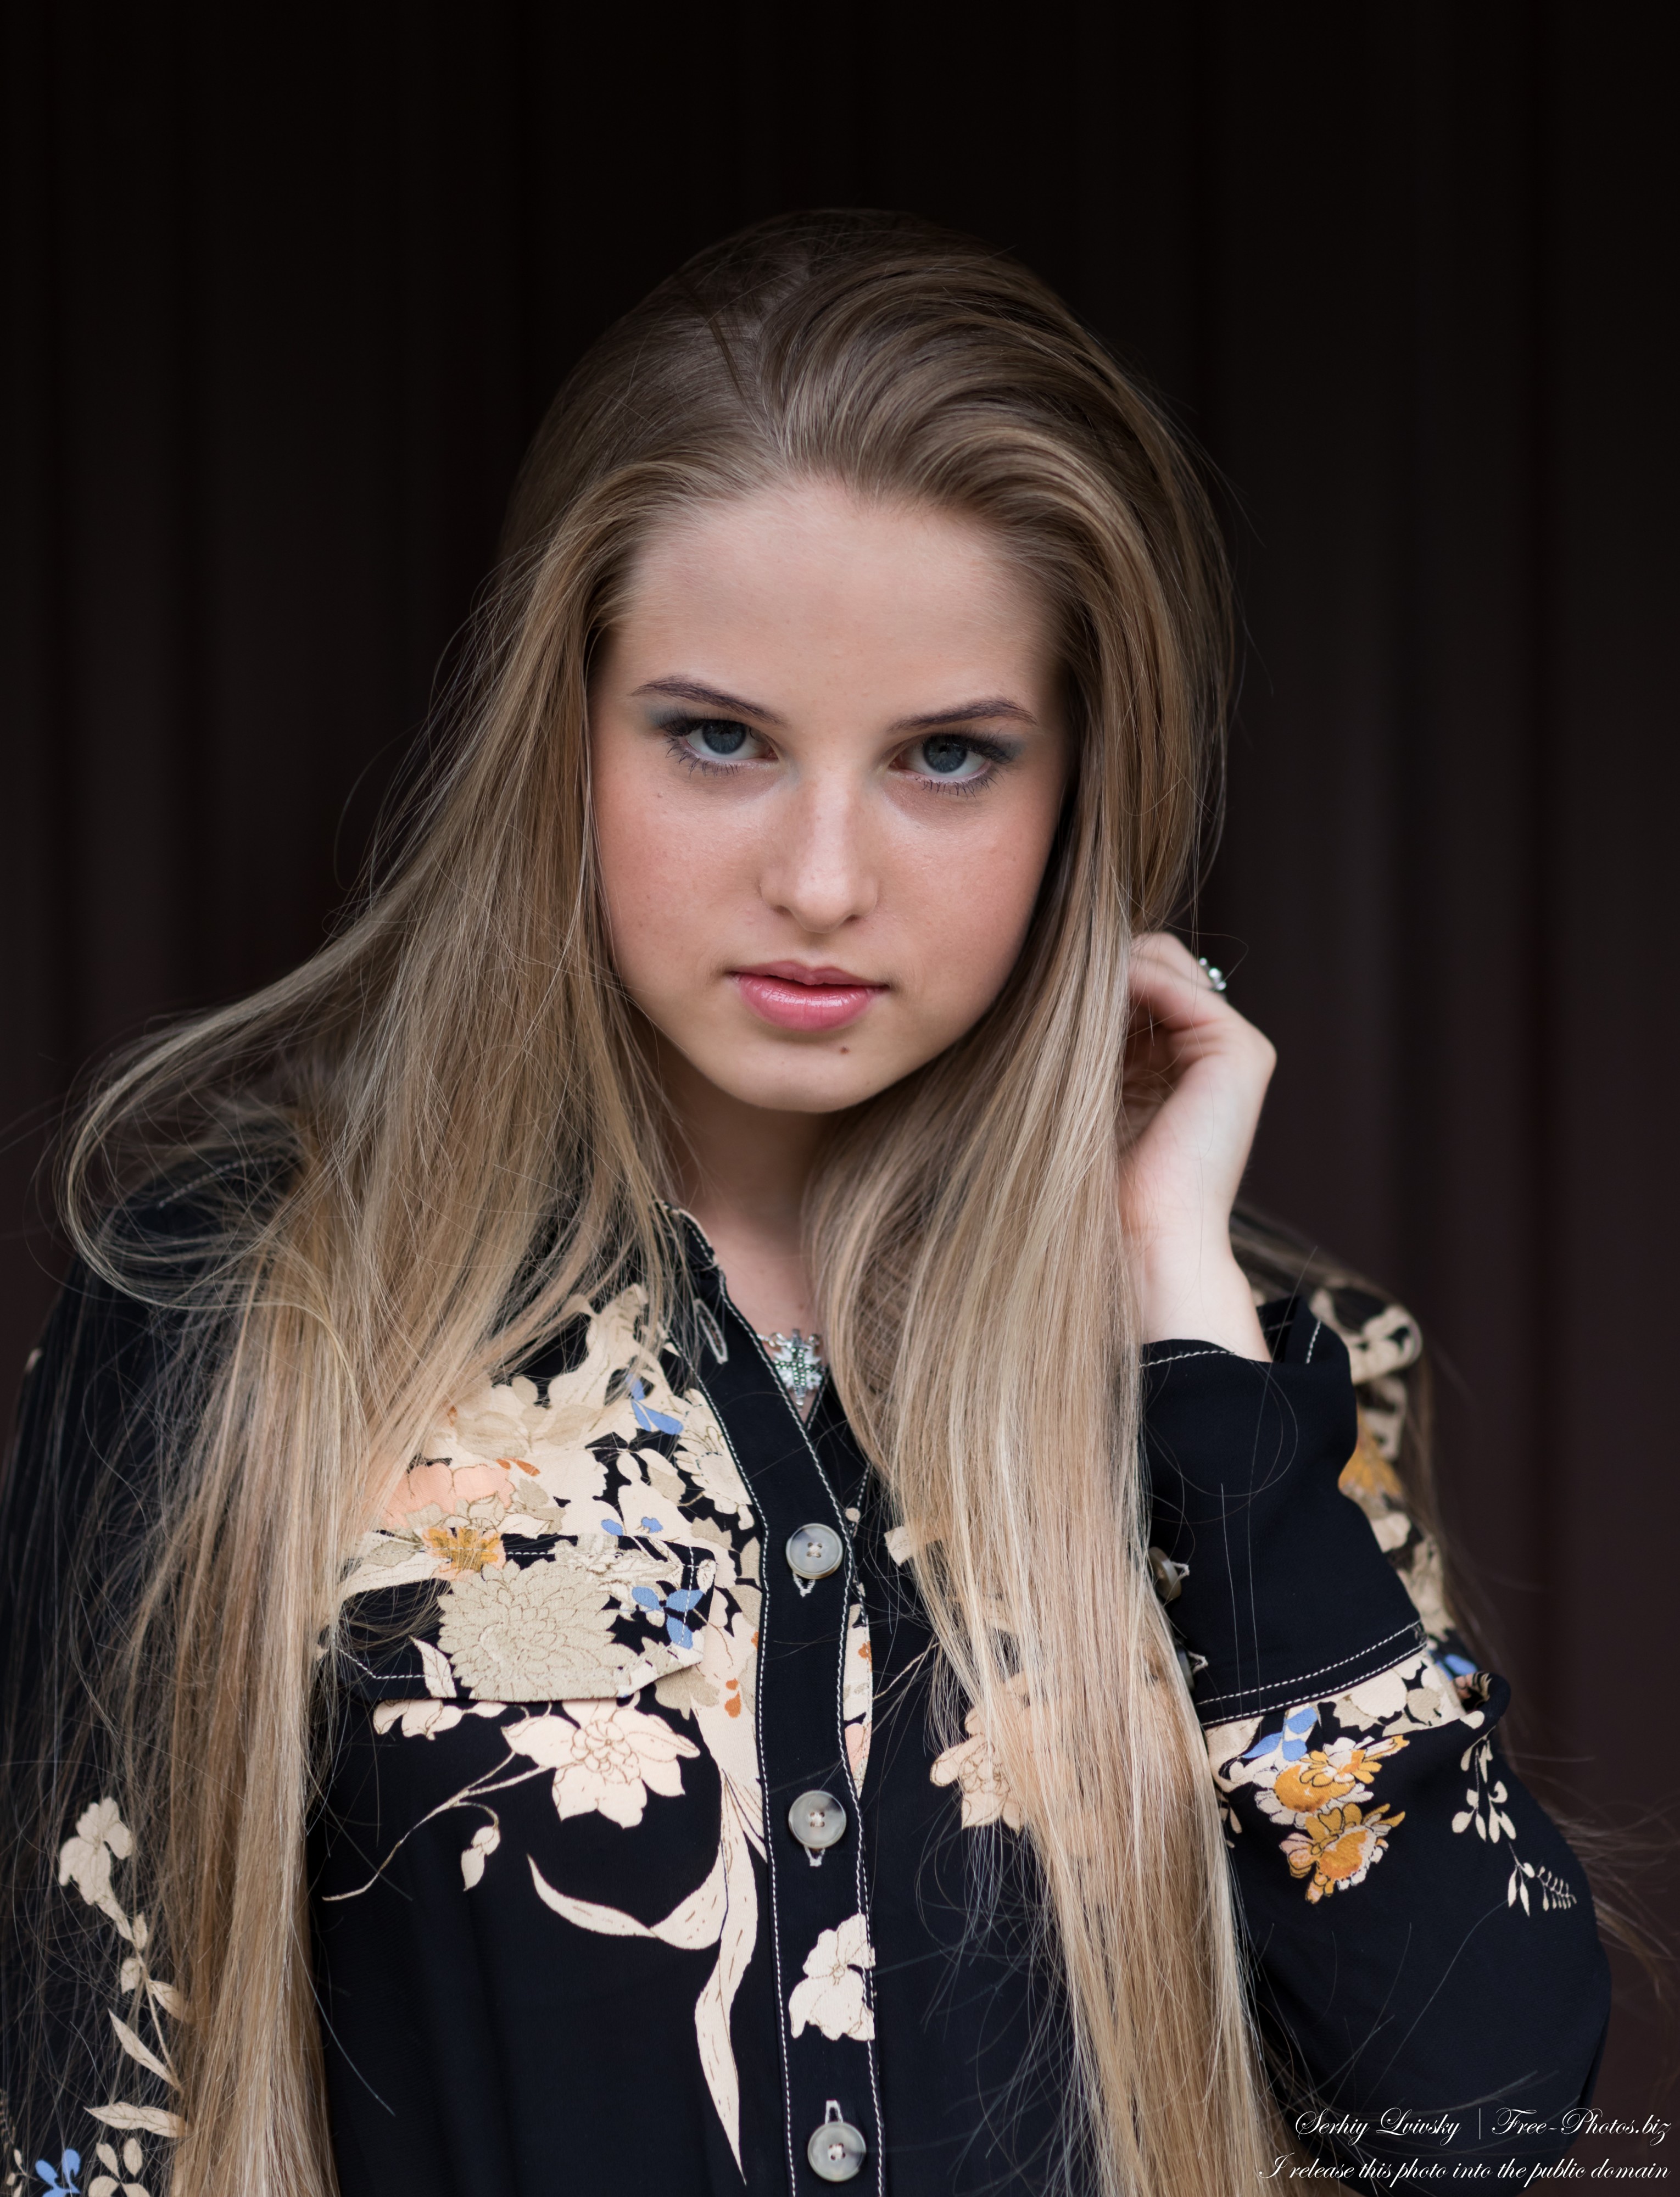 Diana - an 18-year-old natural blonde girl photographed in August 2020 by Serhiy Lvivsky, picture 41